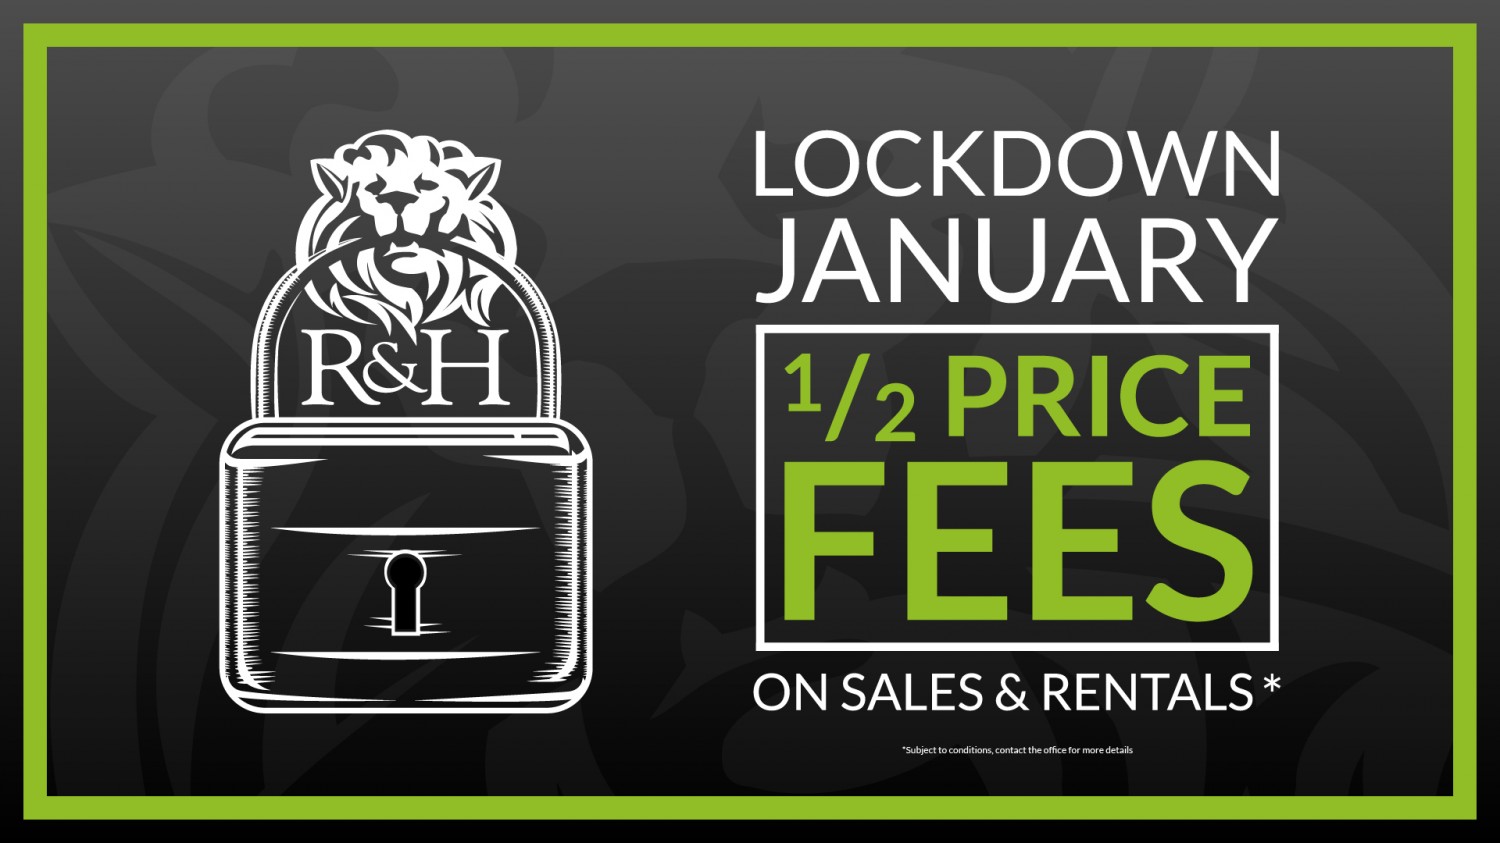 Half Price Fees on Sales and Rentals